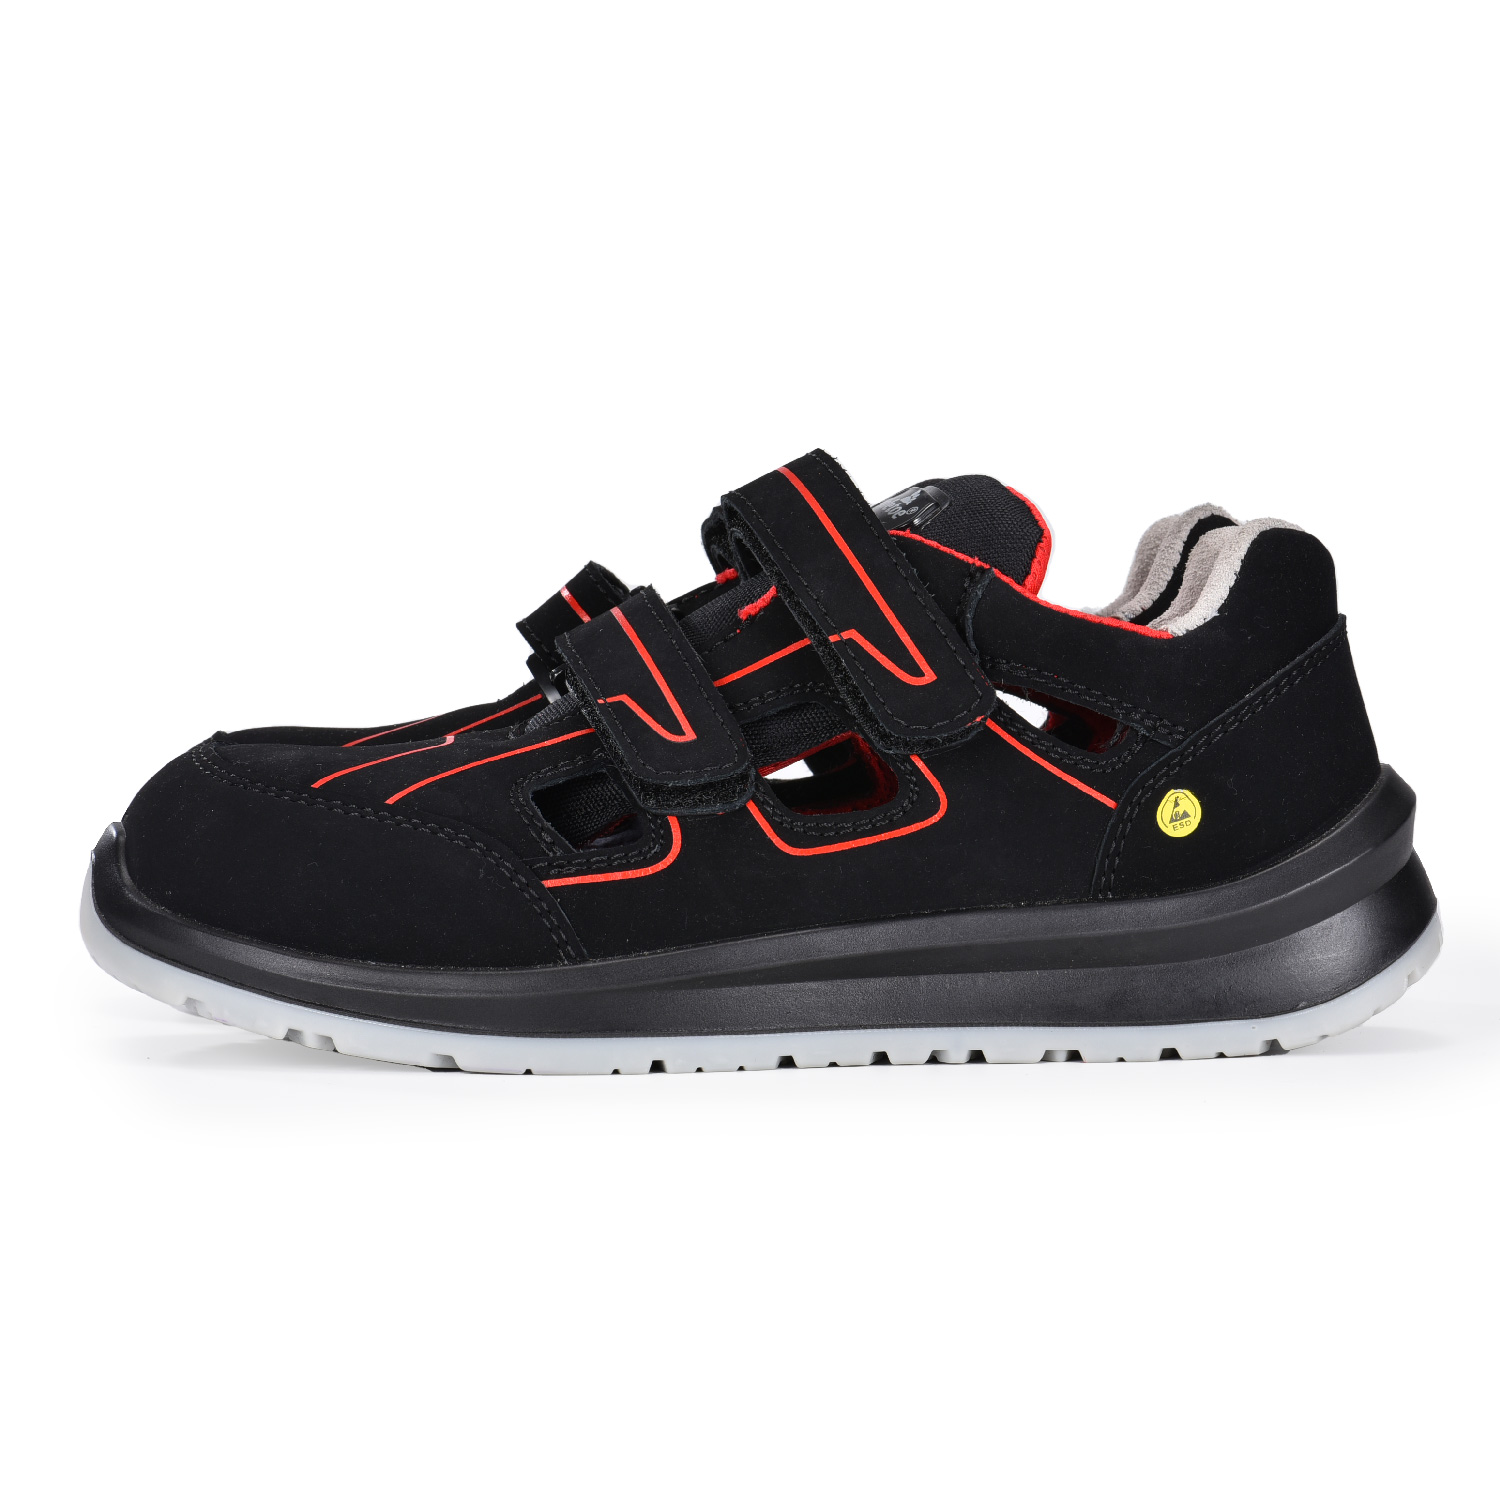 S1P Safety Shoes Non-Slip with Protective Cap Velcro Fastening L-7518B Red